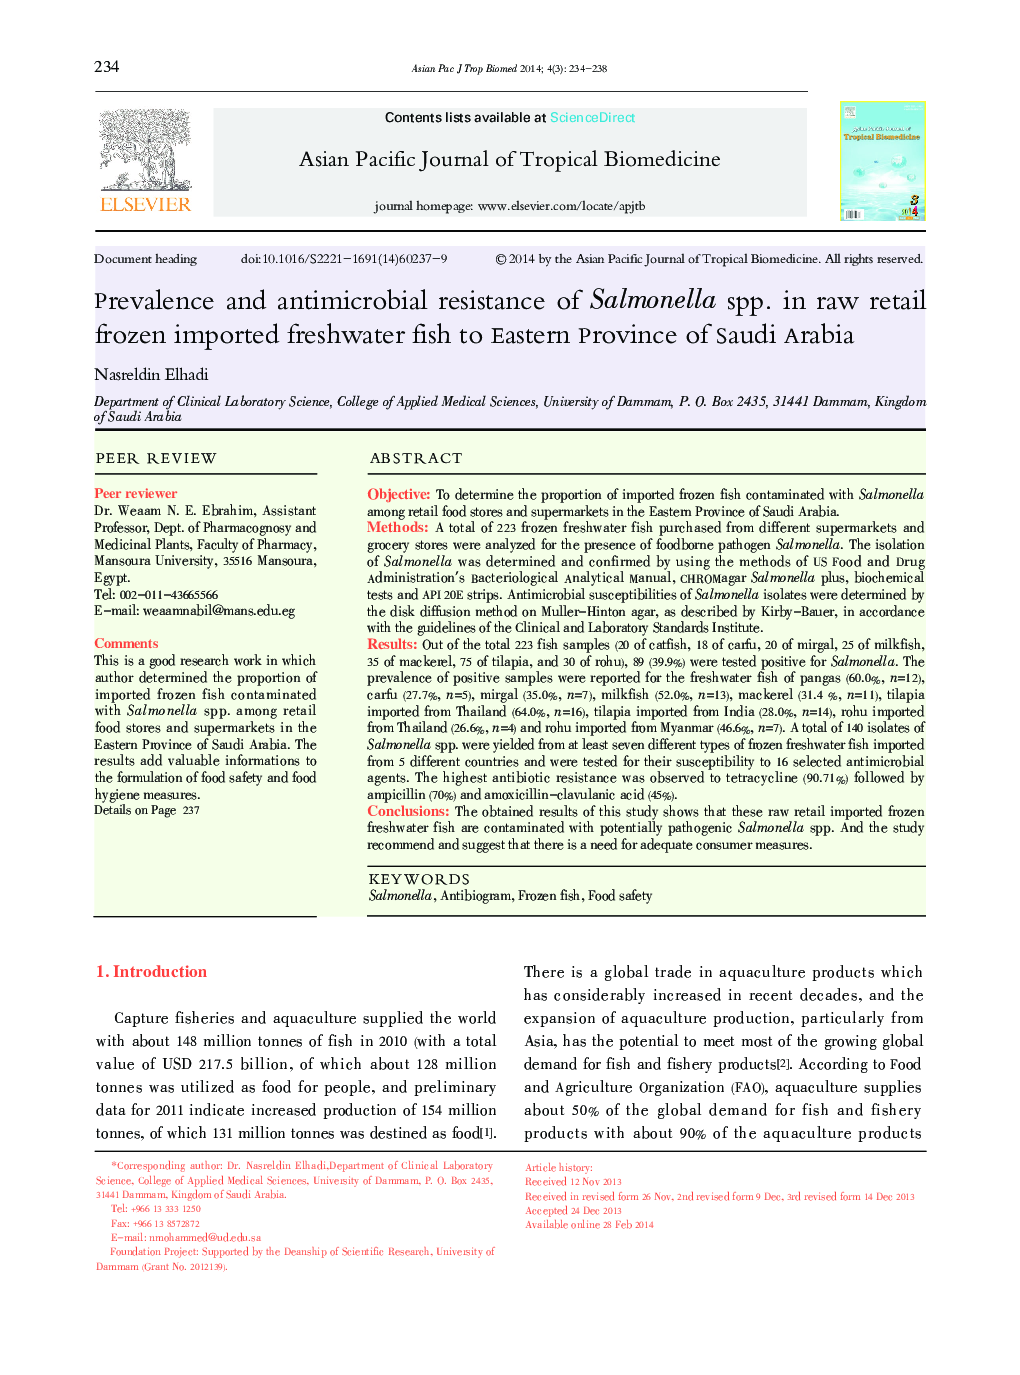 Prevalence and antimicrobial resistance of Salmonella spp. in raw retail frozen imported freshwater fish to Eastern Province of Saudi Arabia 